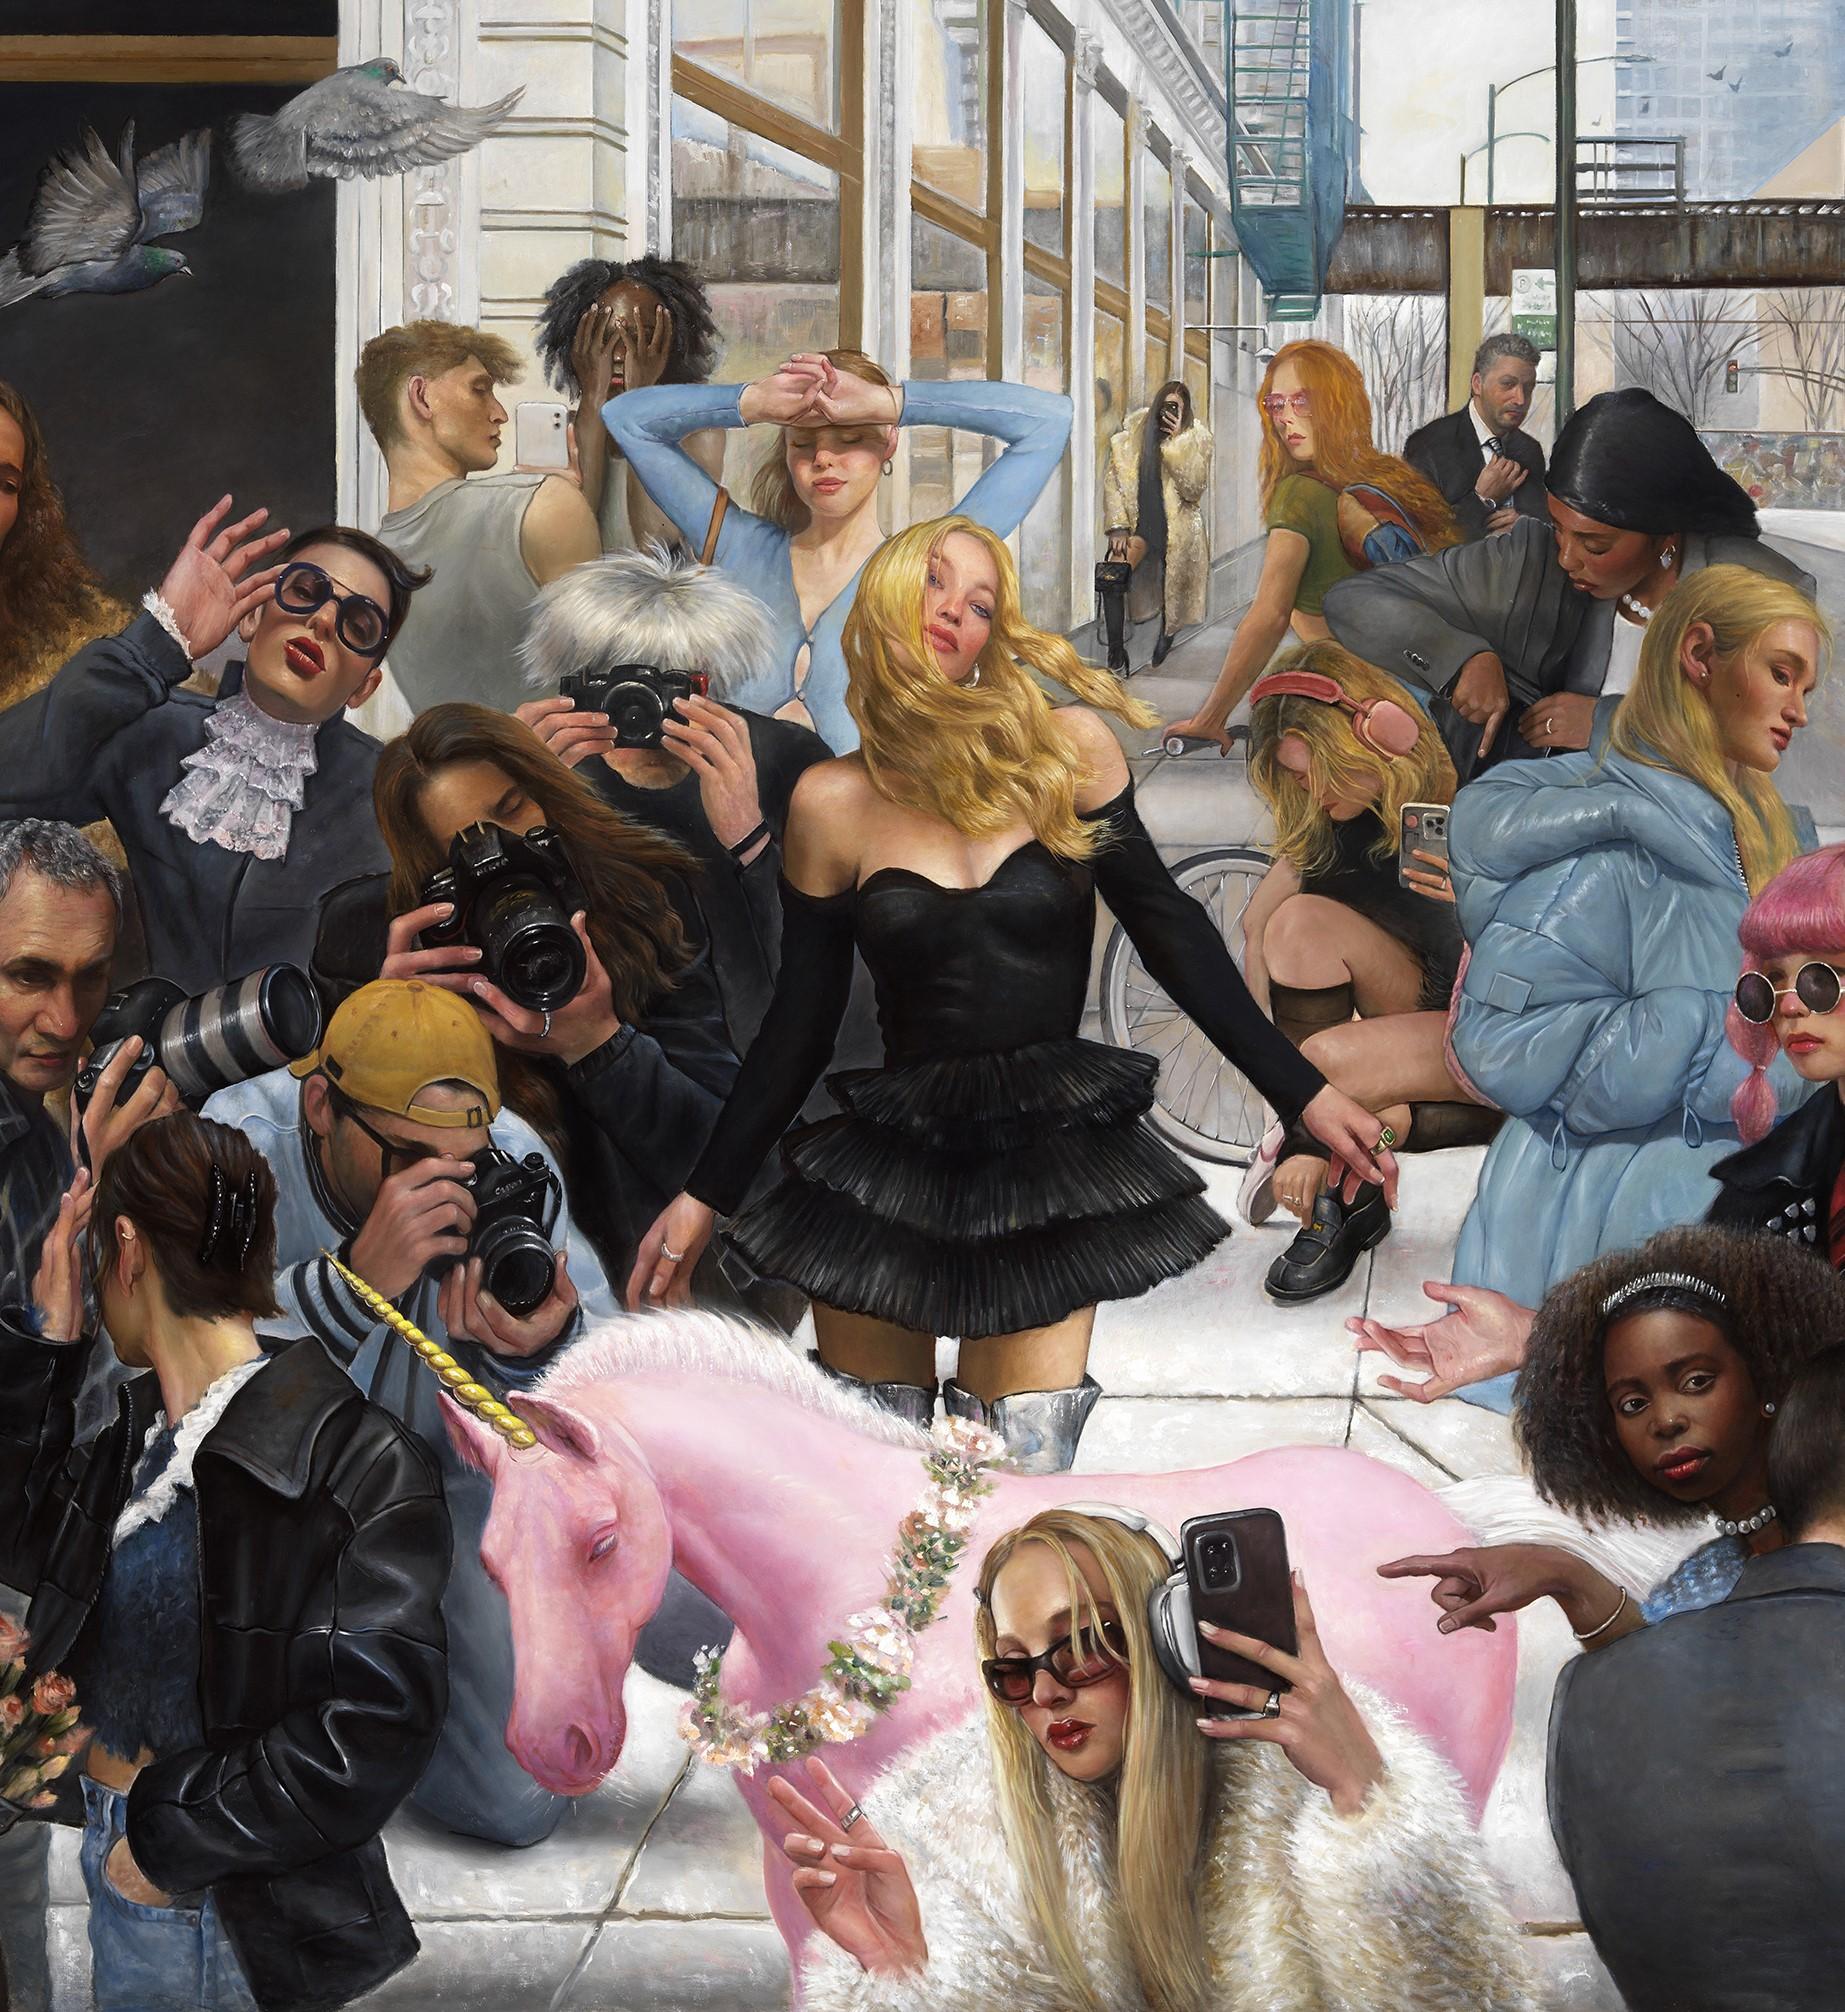 A Selfie, A Pink Unicorn, Paparazzi! What Does It Take To Get Noticed?   - Painting by Bruno Surdo